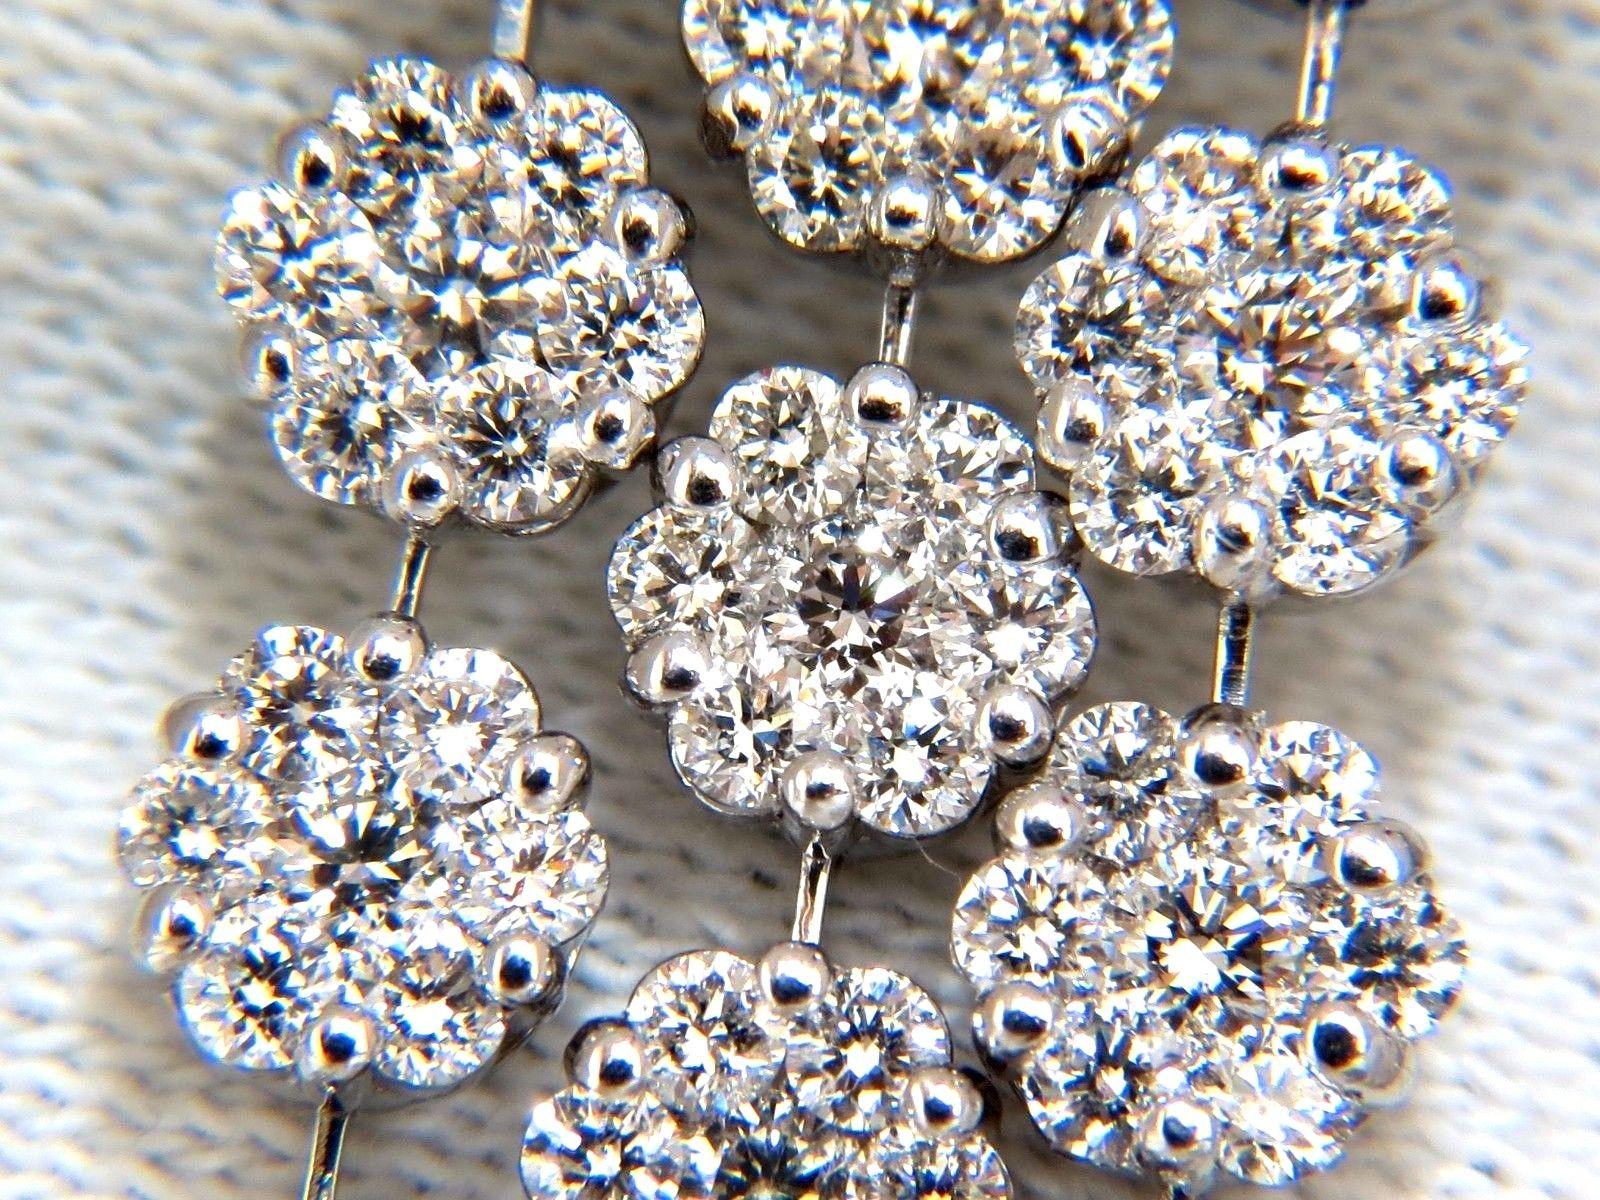 5 Tier & floating cluster drops.

Wide Chandelier earrings.

6.50cts of natural round diamonds: 

Rounds, Full Cut brilliants.

G-color, Vs-2 clarity.

18kt. white gold

19 grams.

Earrings measure: 2 inch long

.6 inch wide

Cluster top: .41